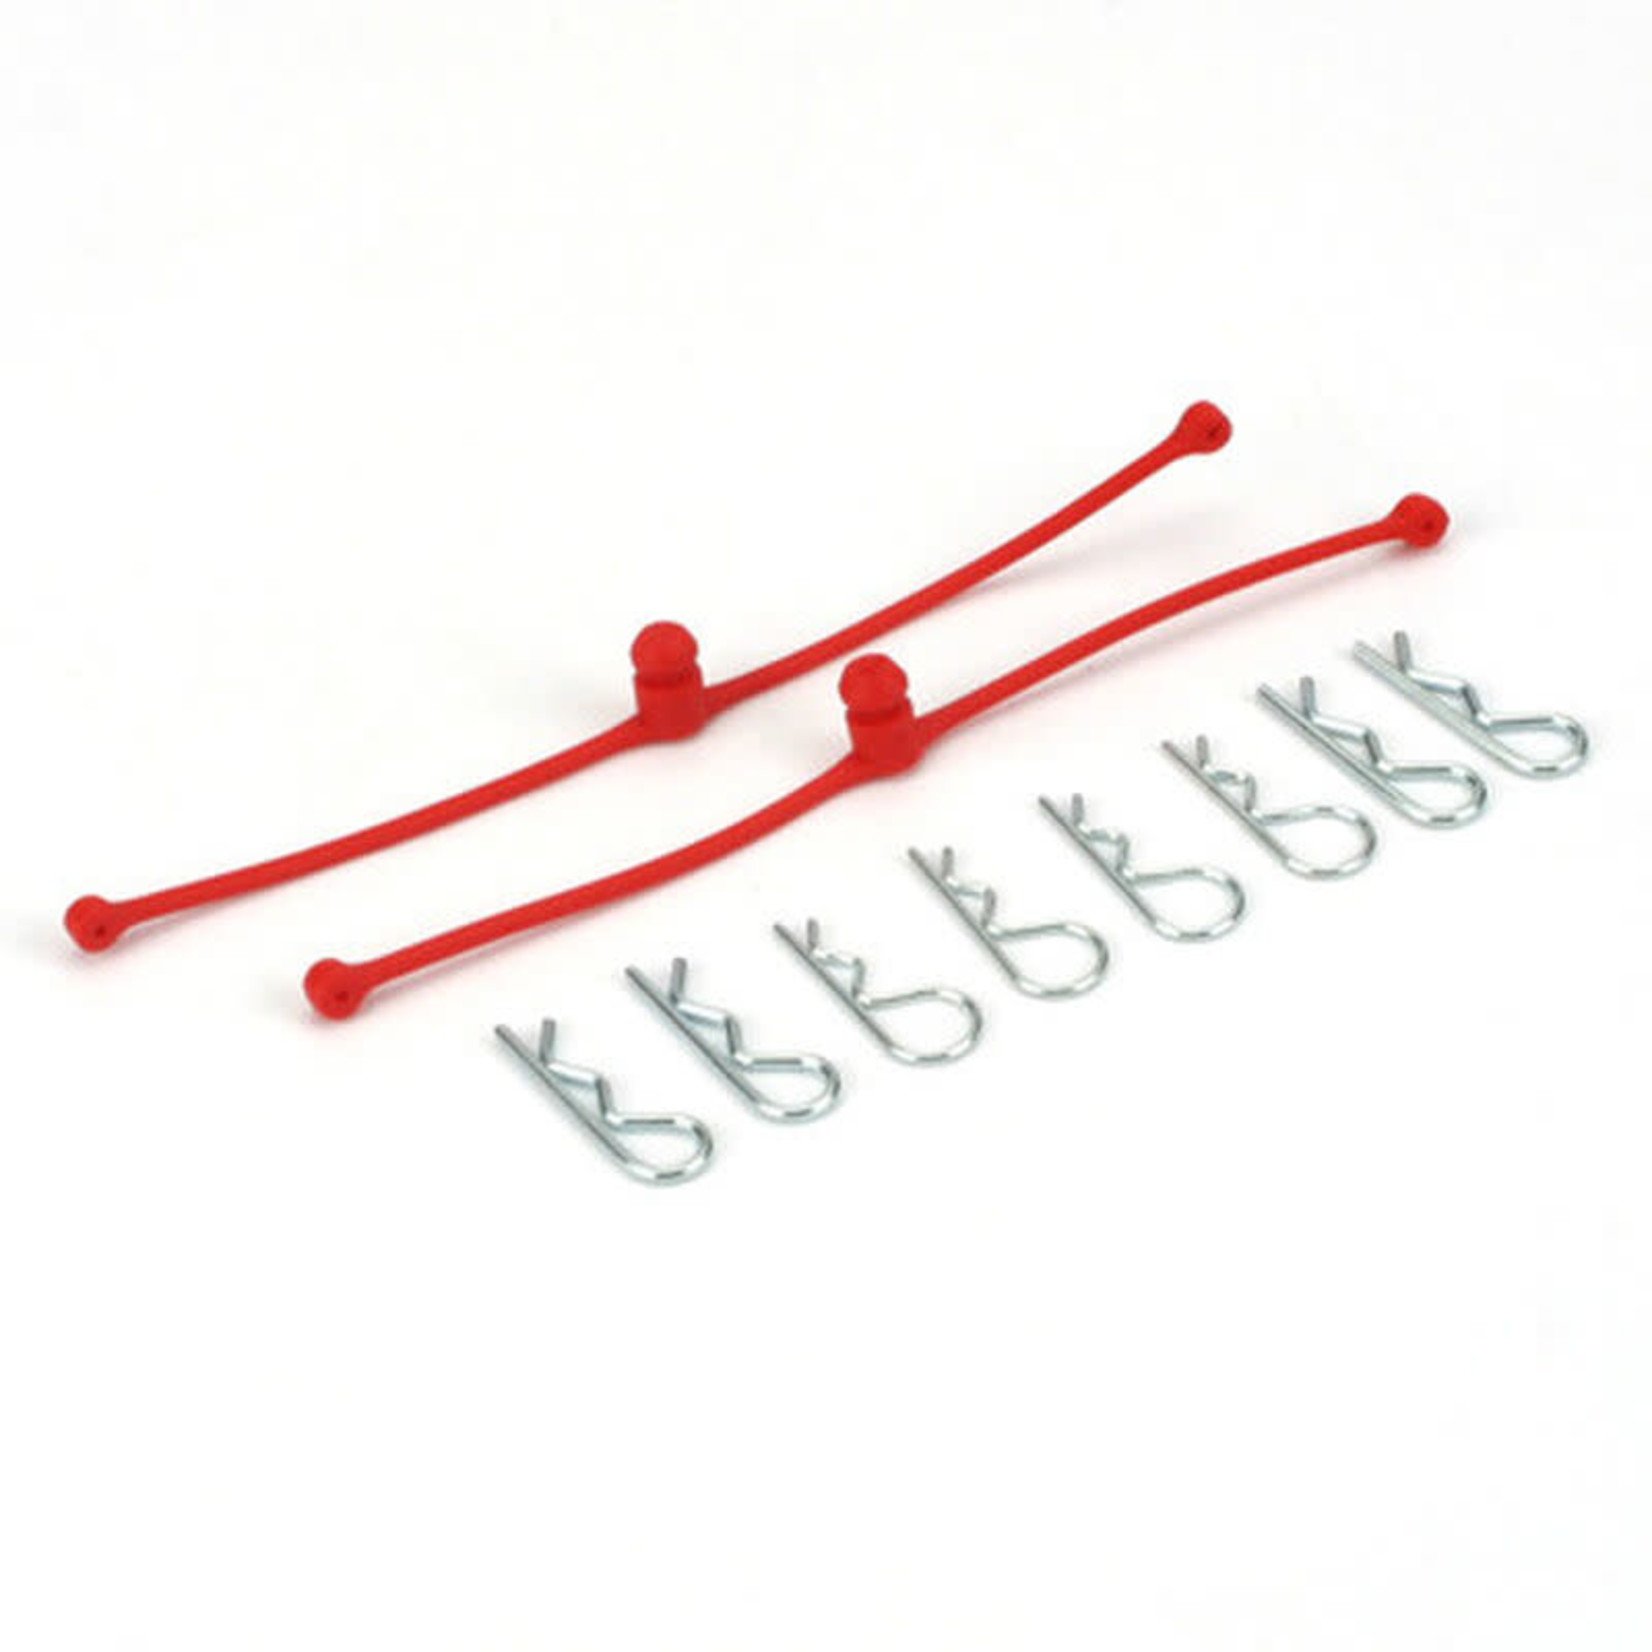 DuBro Body Clip Retainer, Red (2)